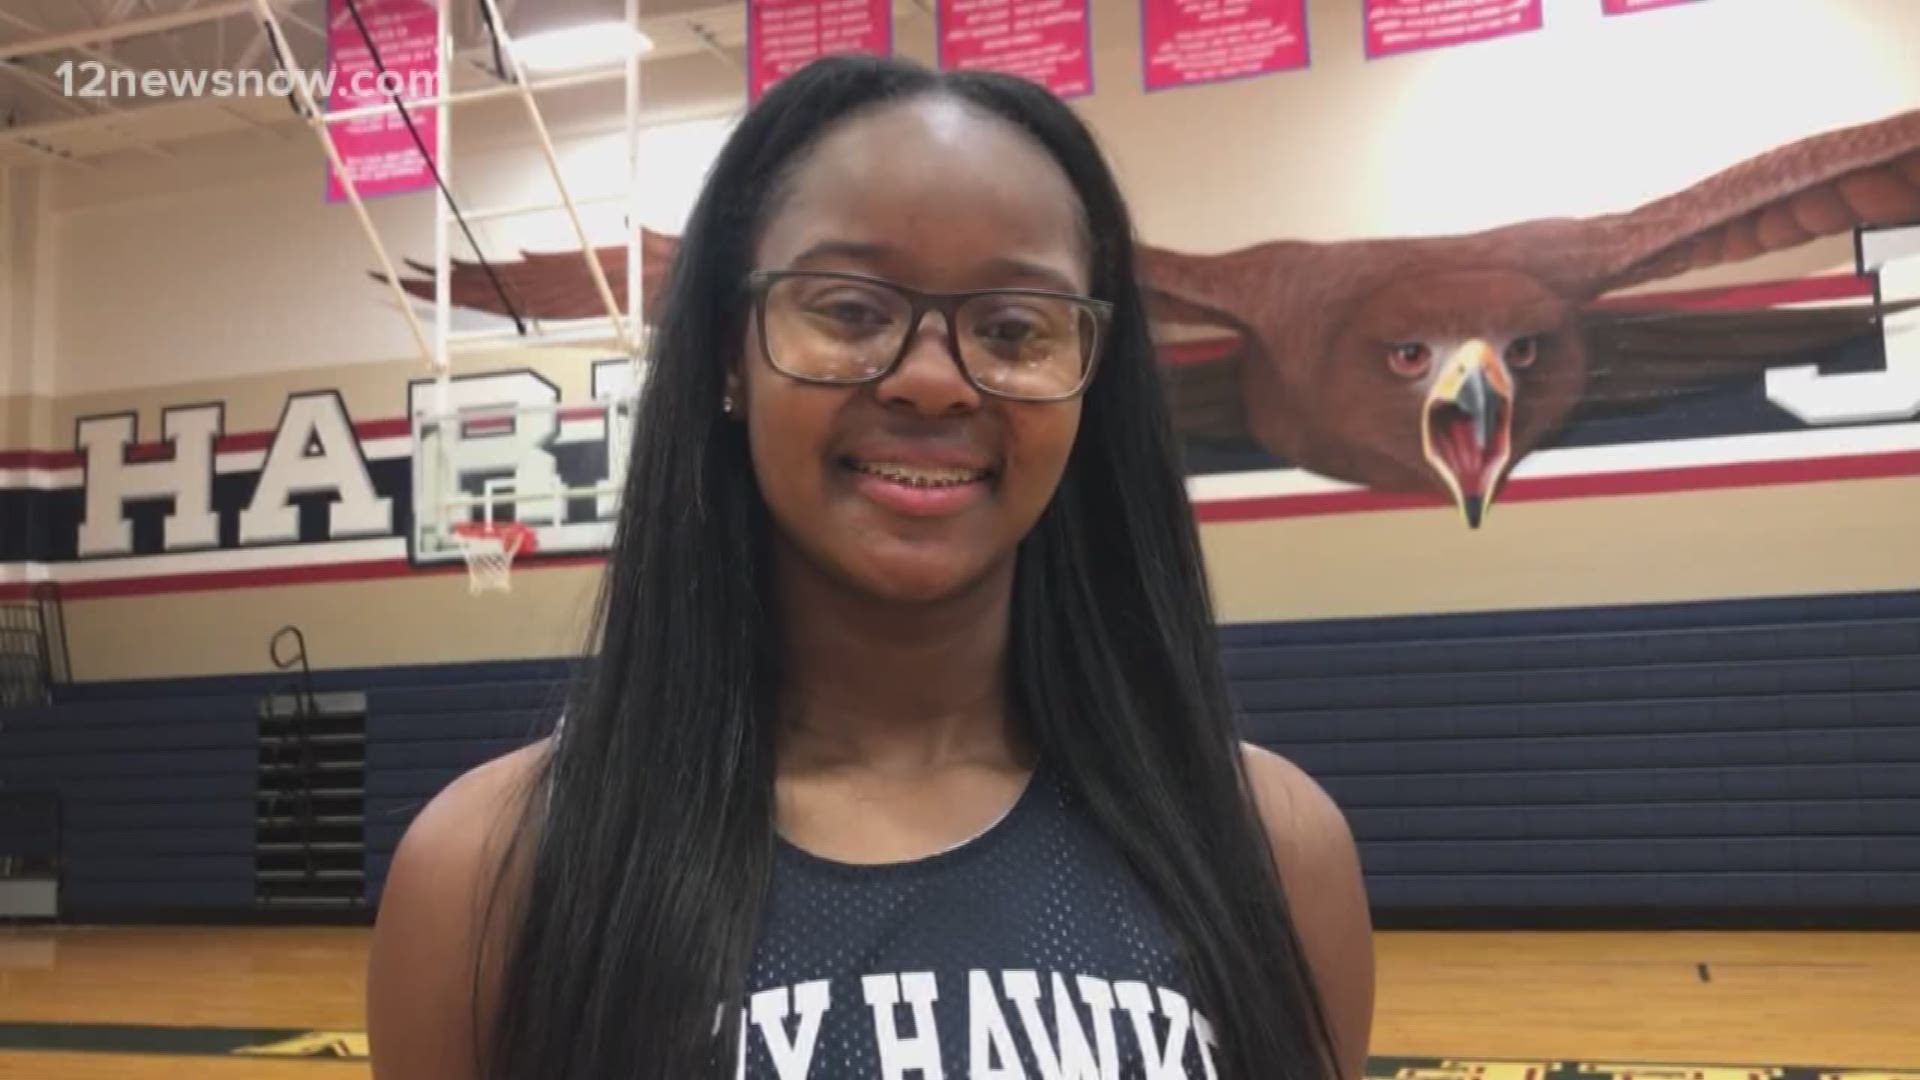 The HJ Lady Hawks are one of the hottest basketball teams in all of Southeast Texas. Their silent senior leader is one reason for the teams early success.